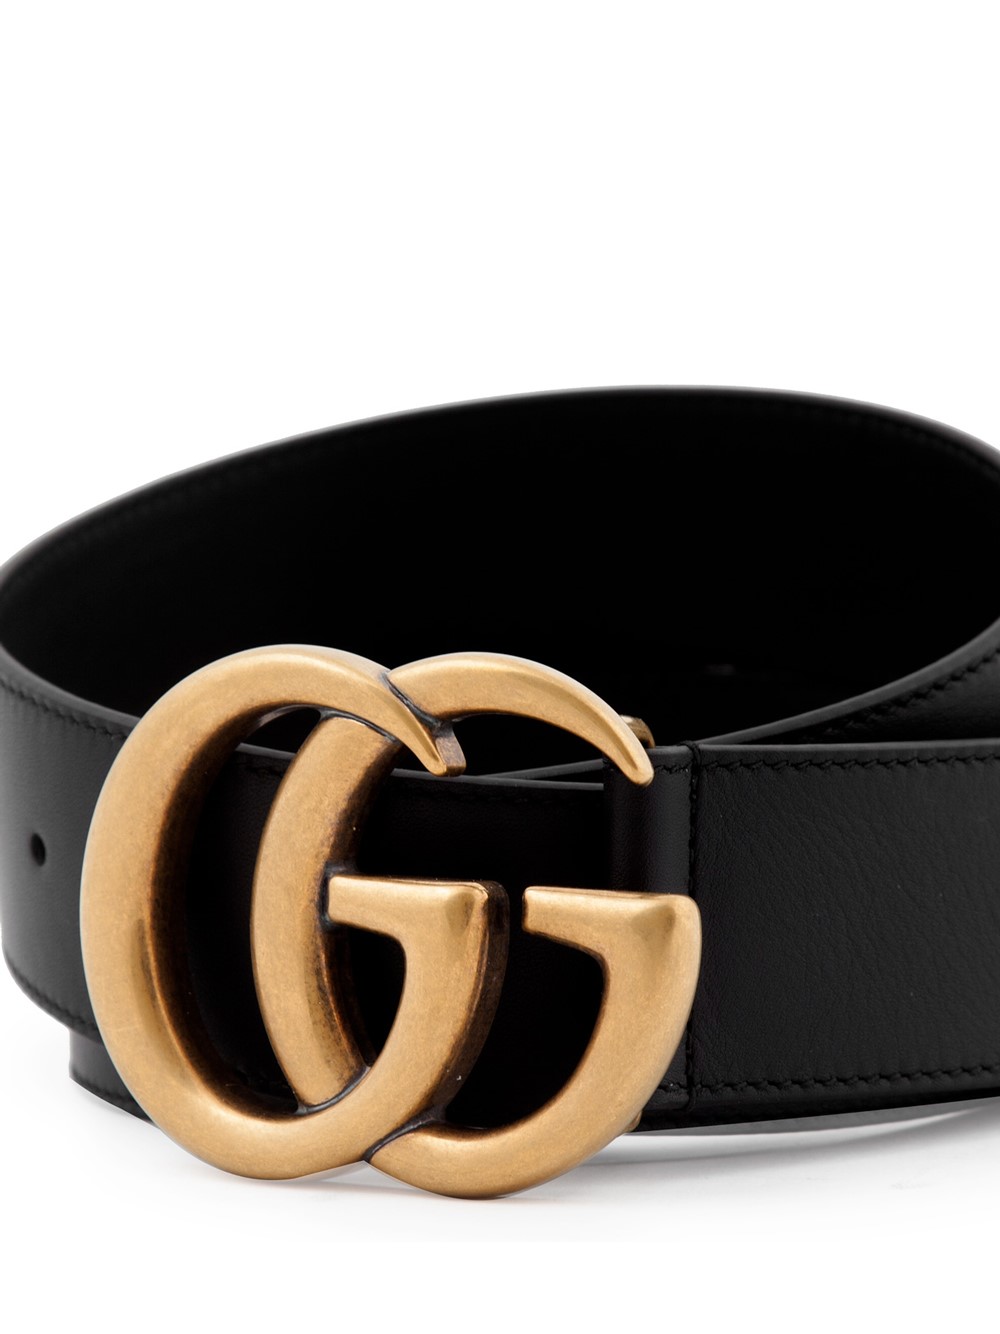 gucci GG MARMONT BELT available on www.bagssaleusa.com - 28984